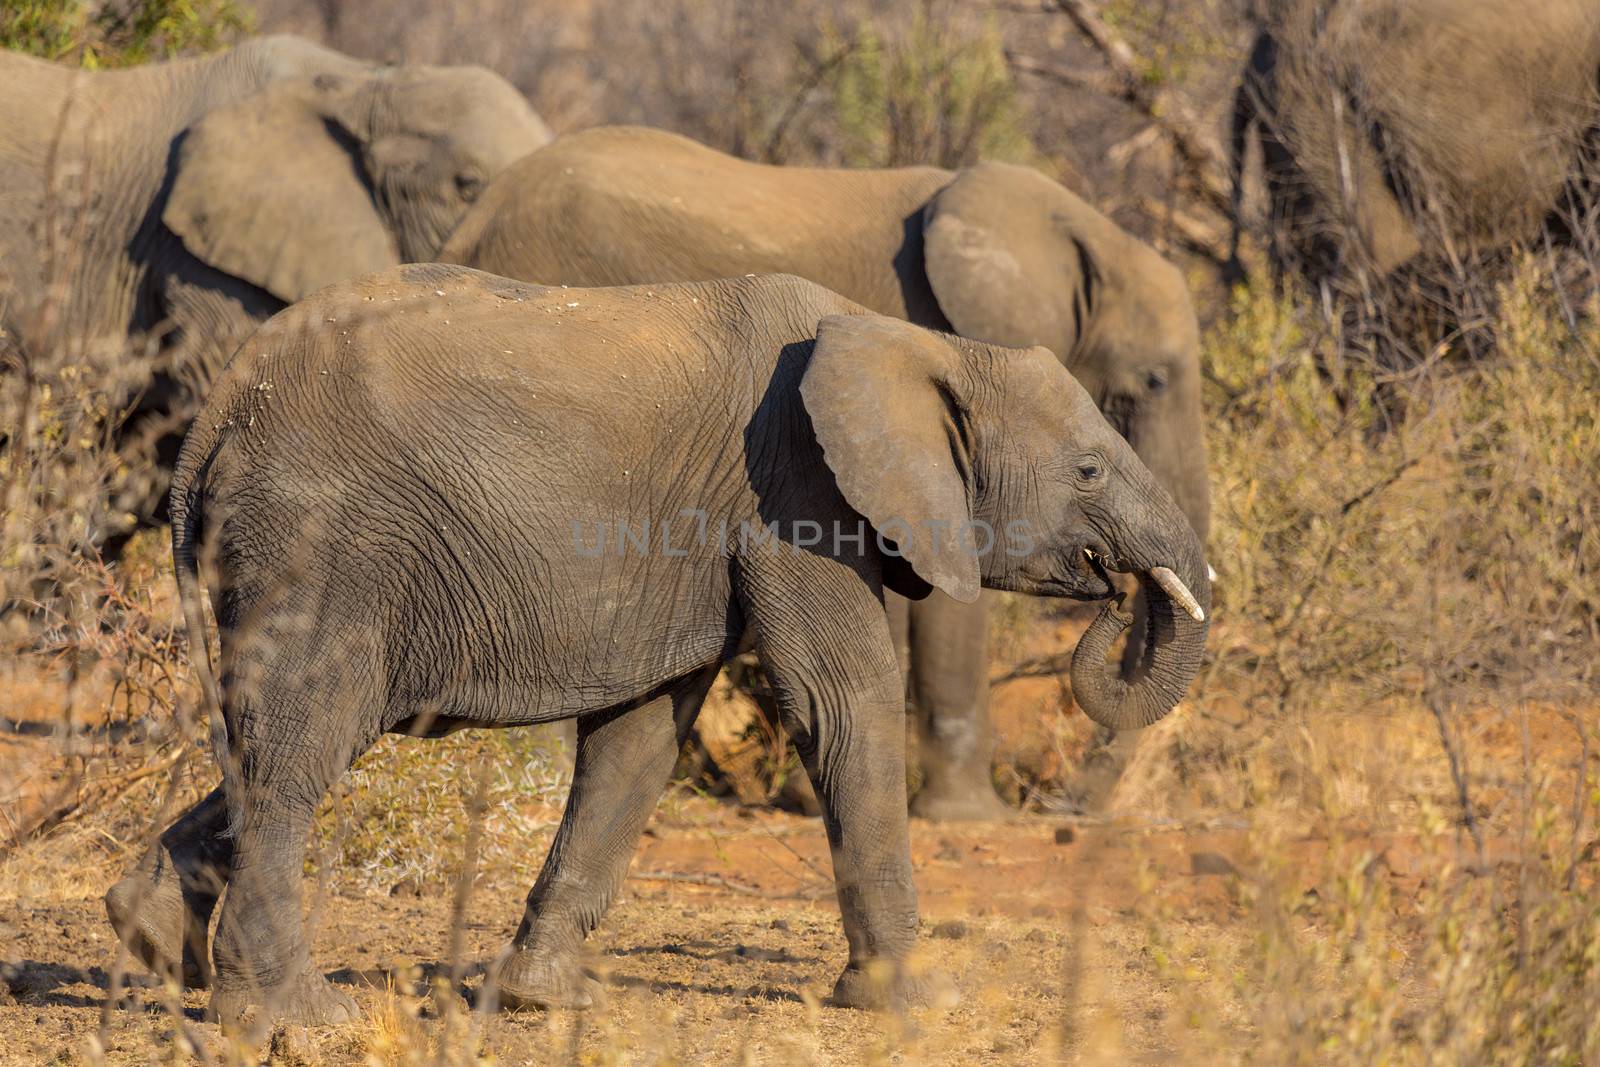 A small elephant herd wandering in the grasslands of South Africa's Pilanesberg National Park